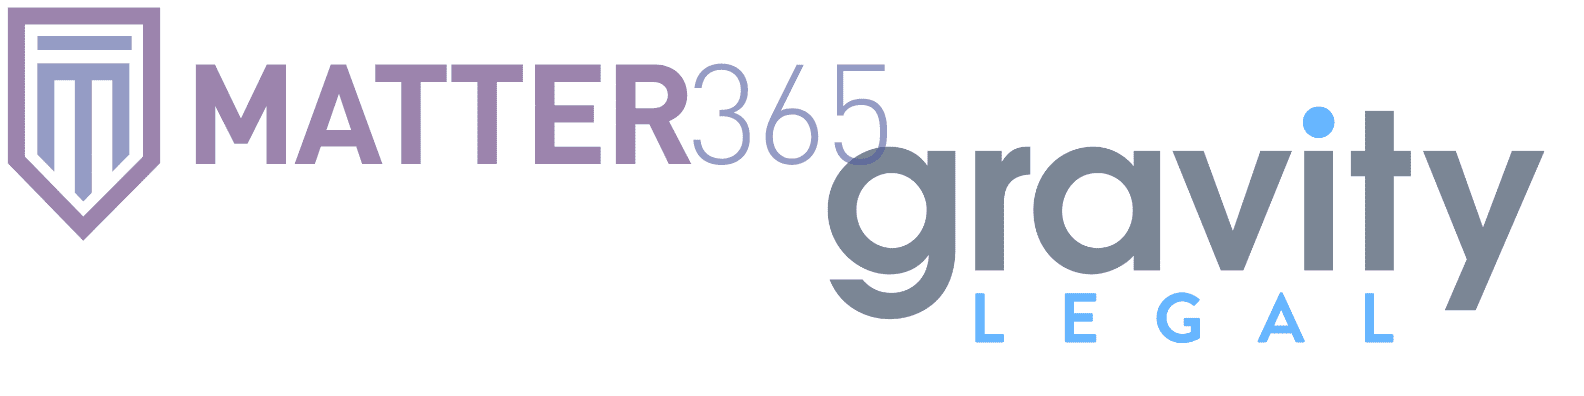 Matter365 and Gravity Legal Integration